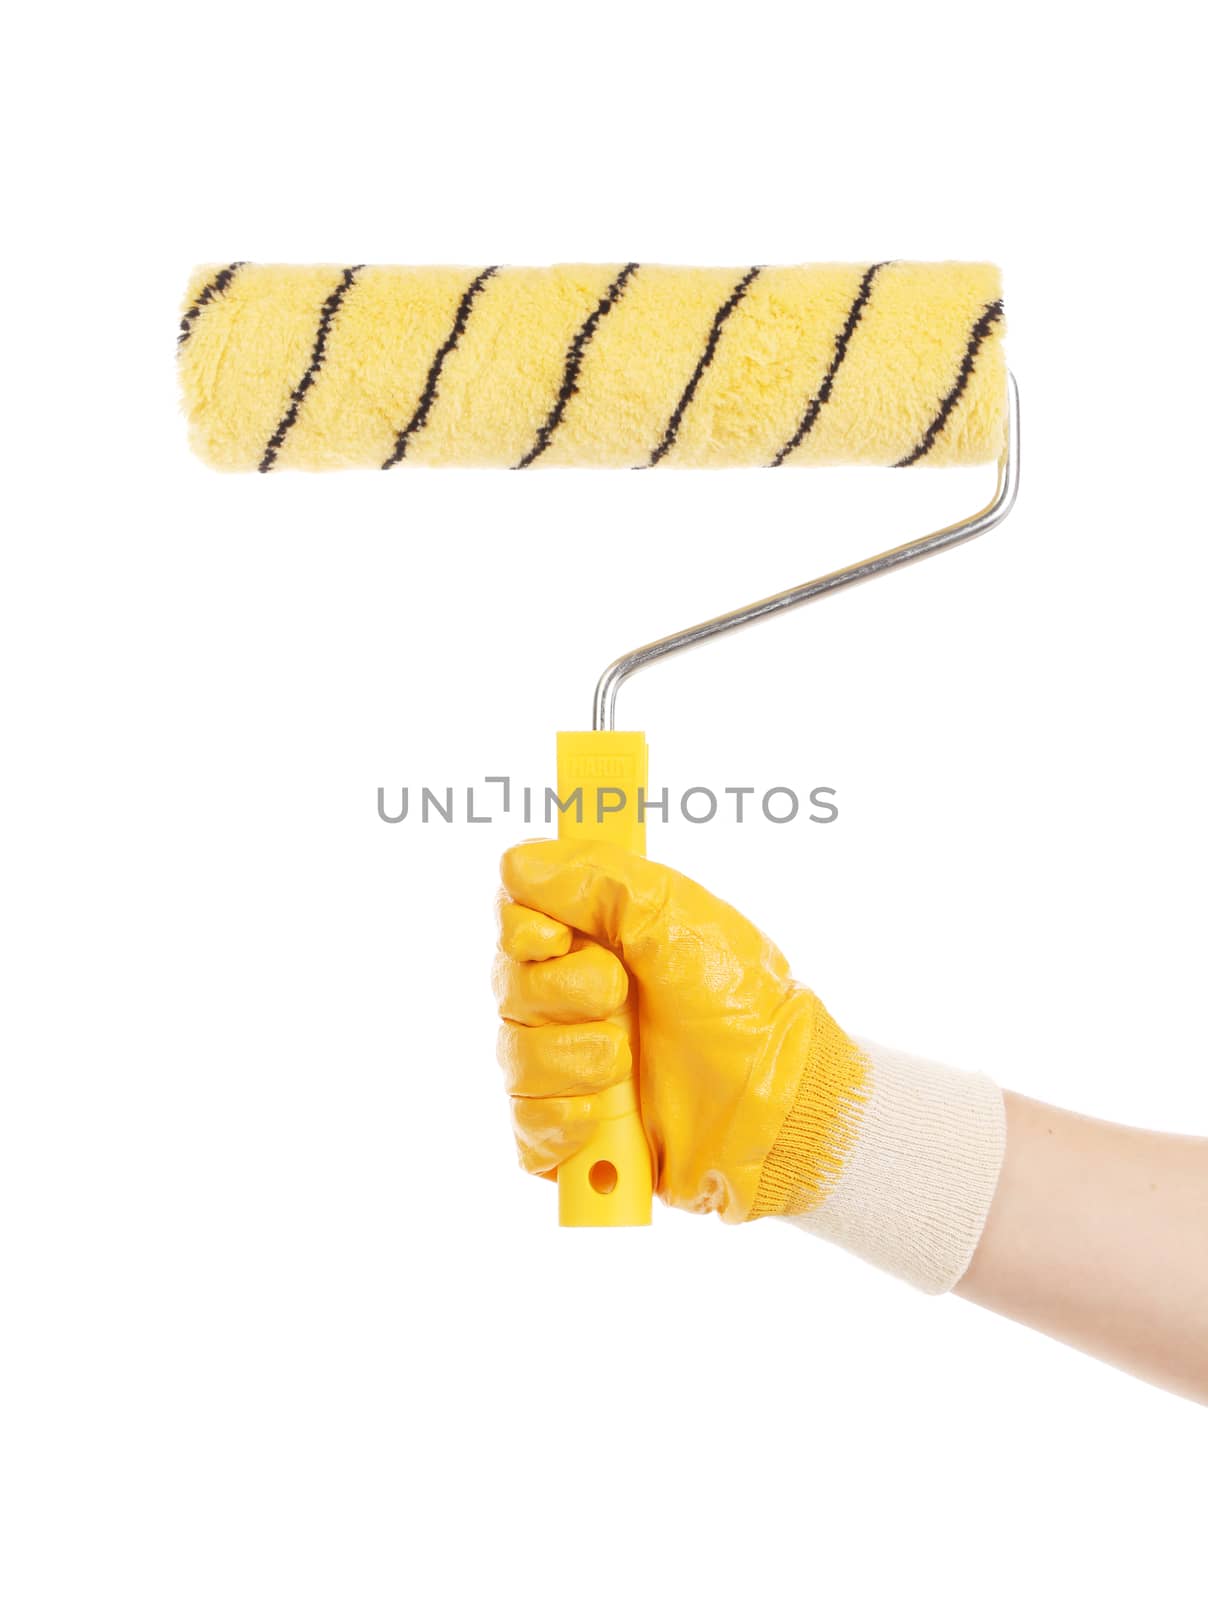 Hand with paintbrush roller. Isolated on a white background.